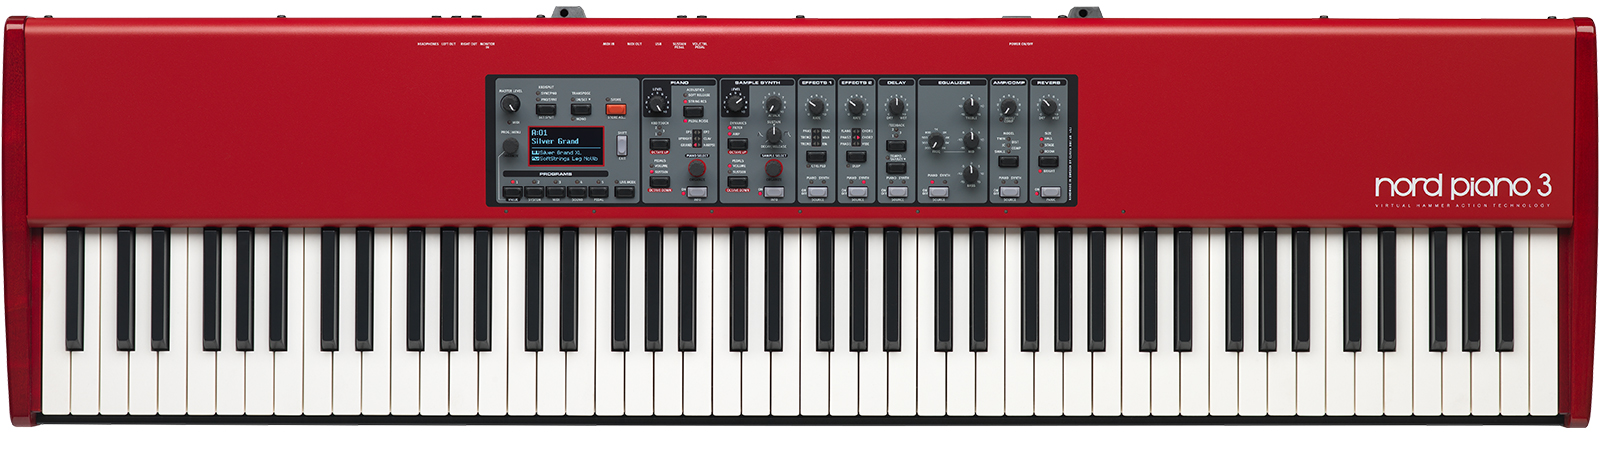 Nord Piano 3 | Nord Keyboards